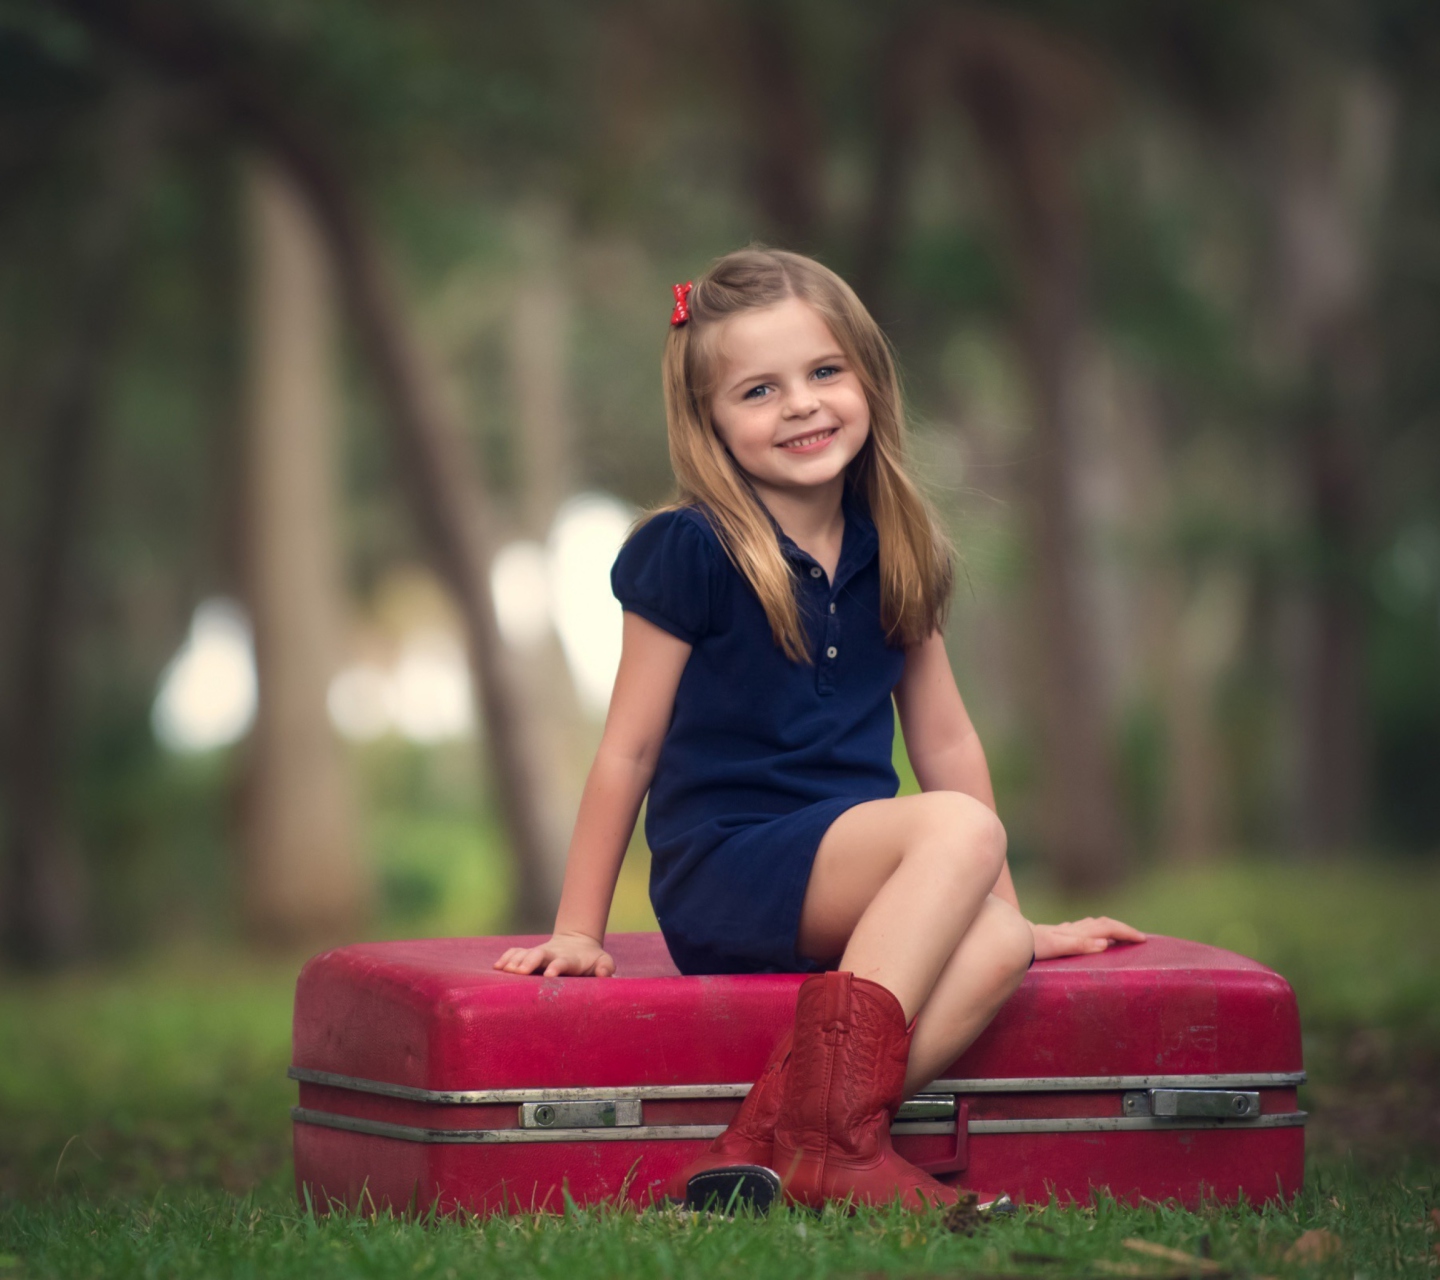 Little Girl Sitting On Red Suitcase screenshot #1 1440x1280